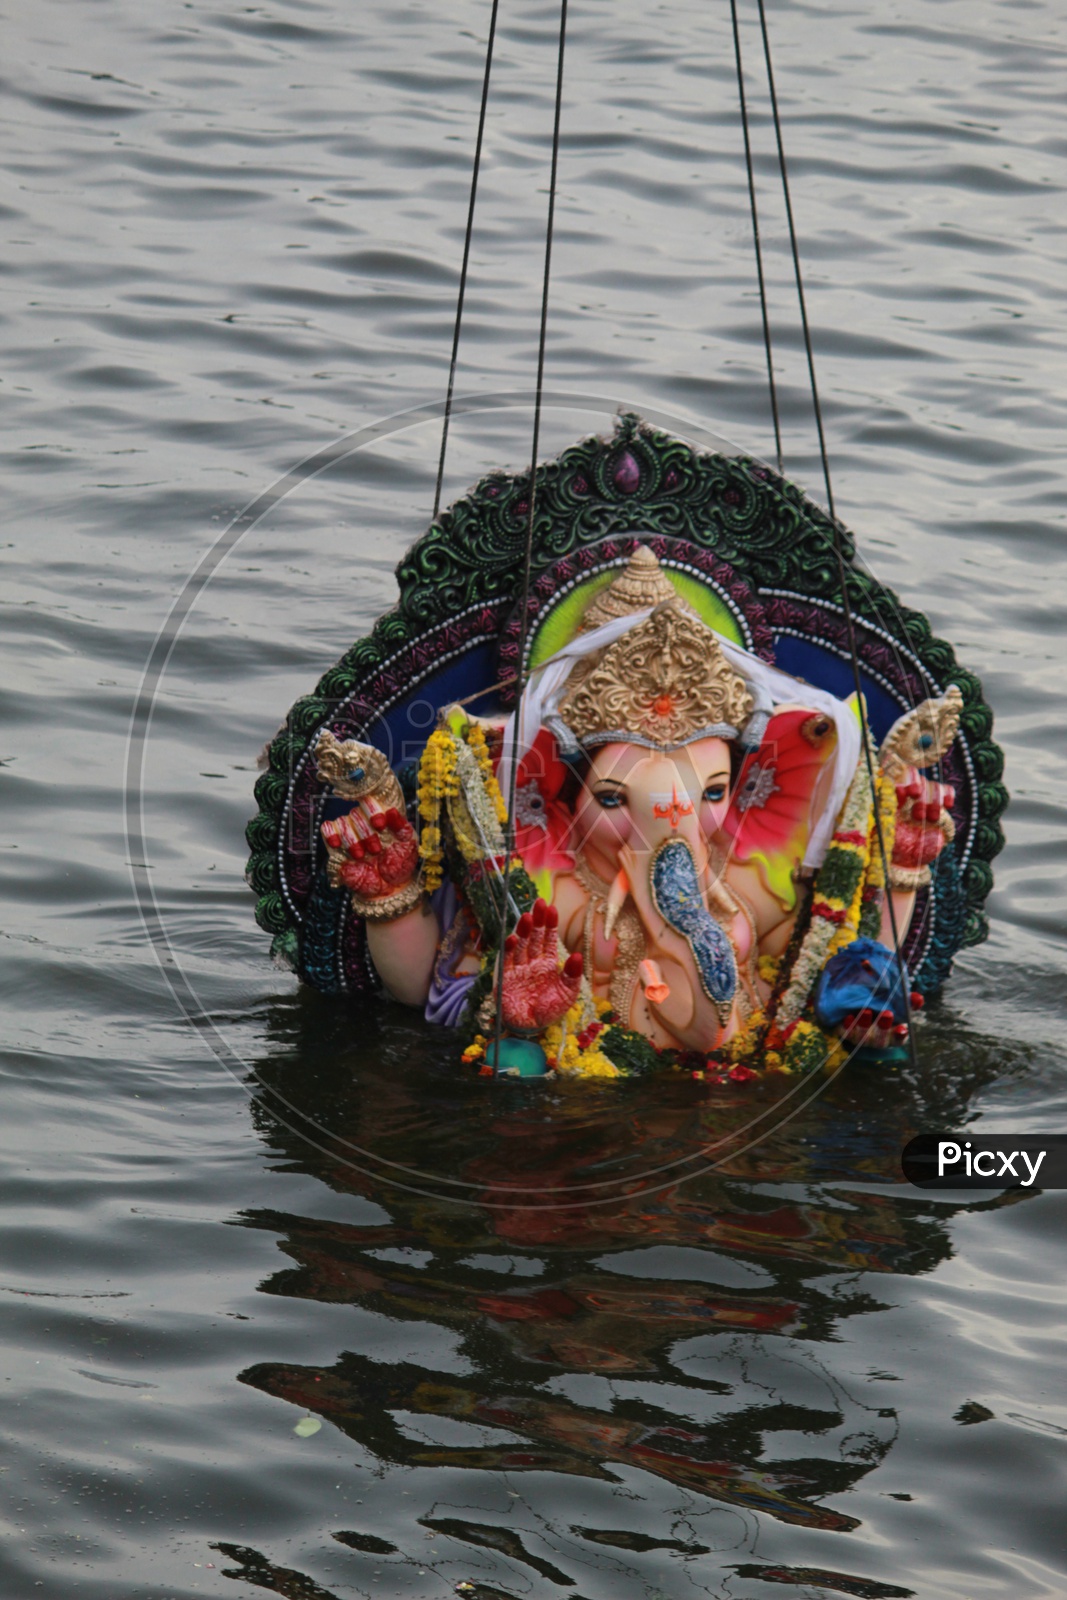 Ganesh Merges Finally into Water